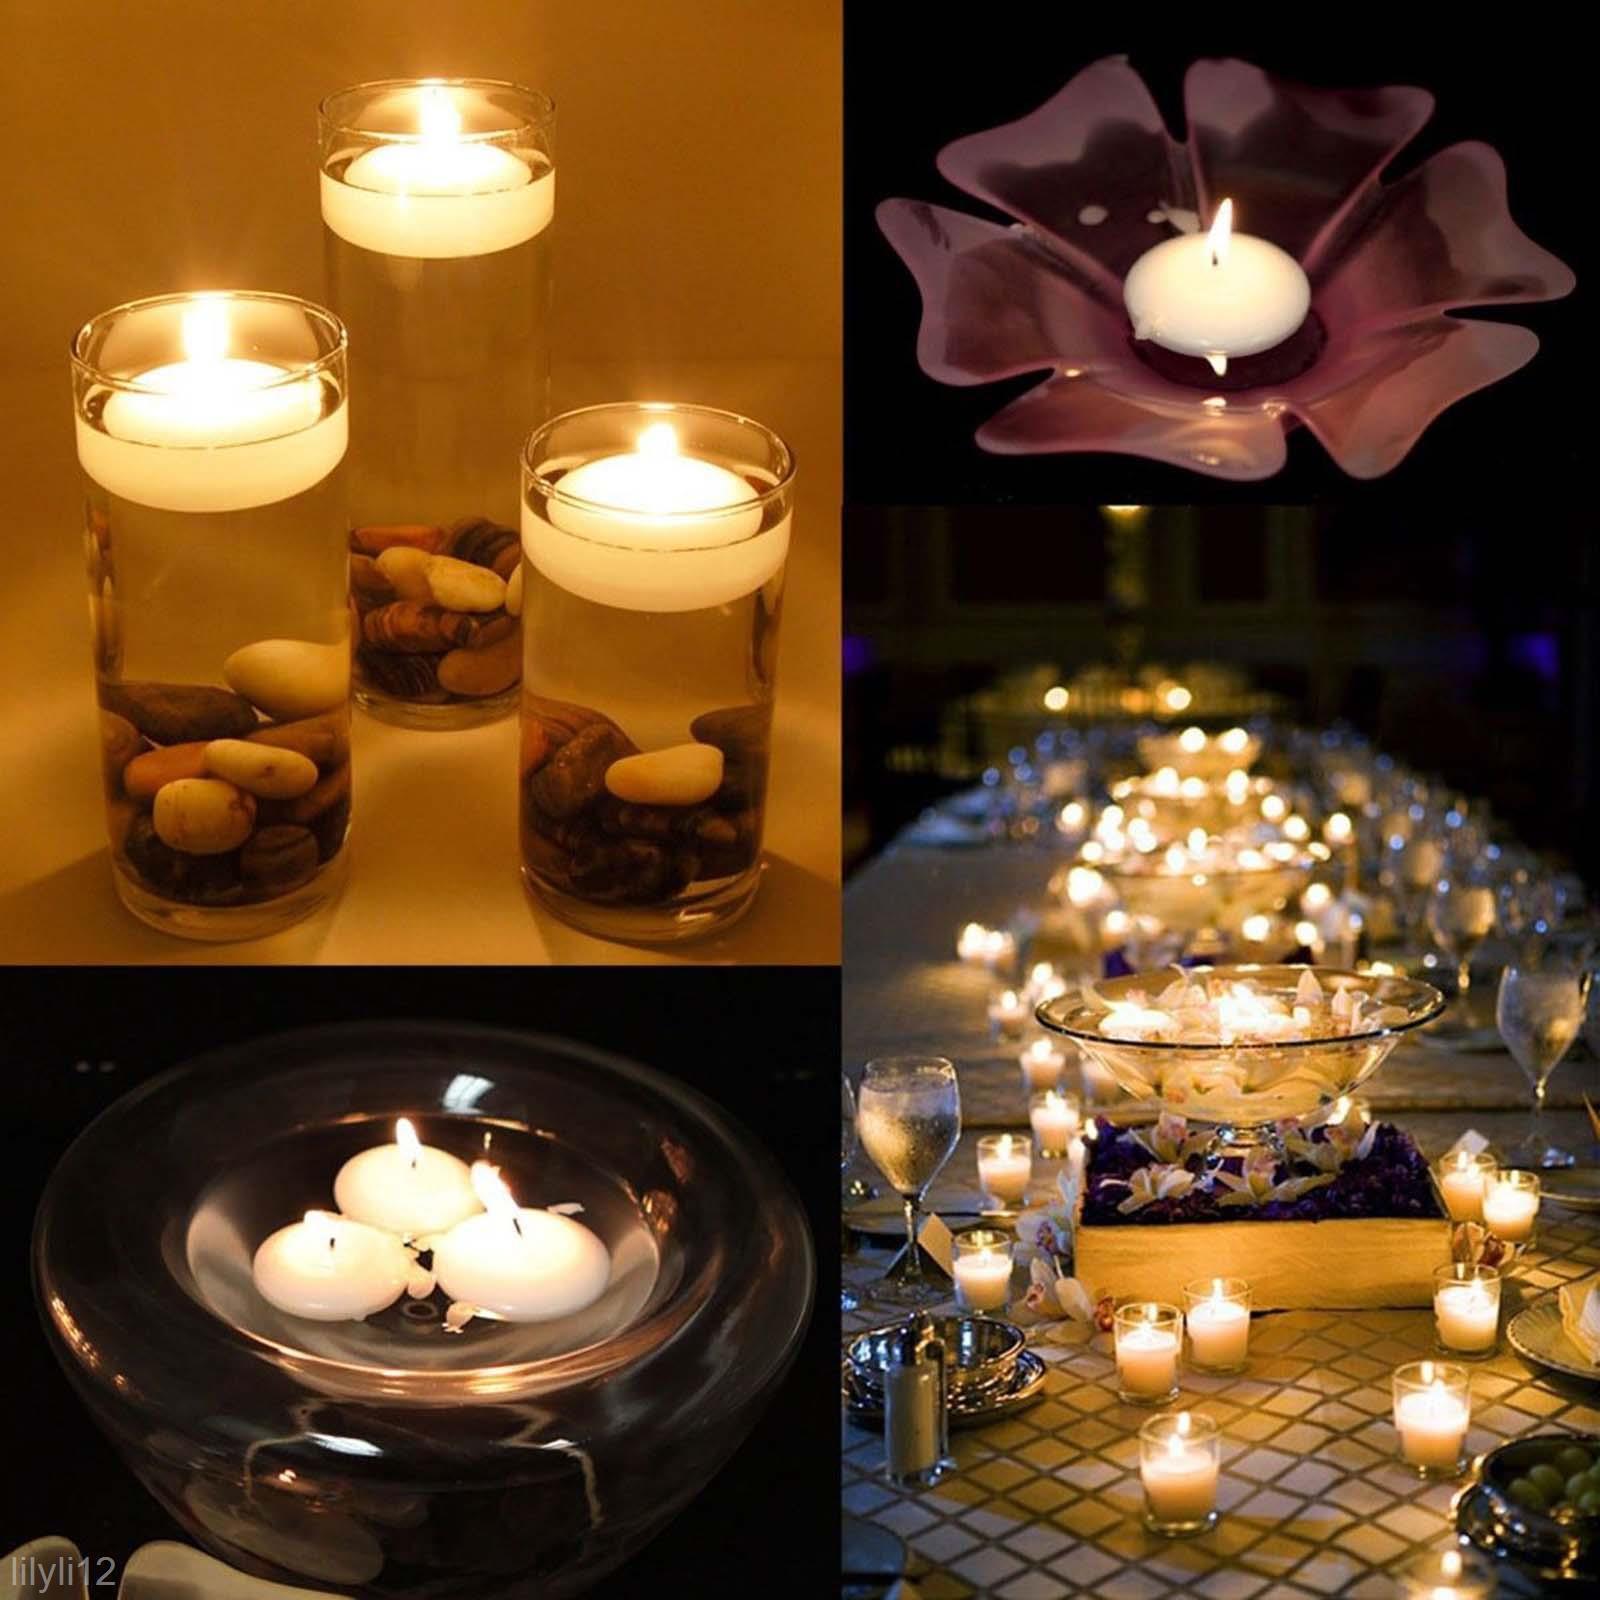 10PCS Romantic Round Water Floating Candle Disc Floater Candles Wedding Party Home Decor